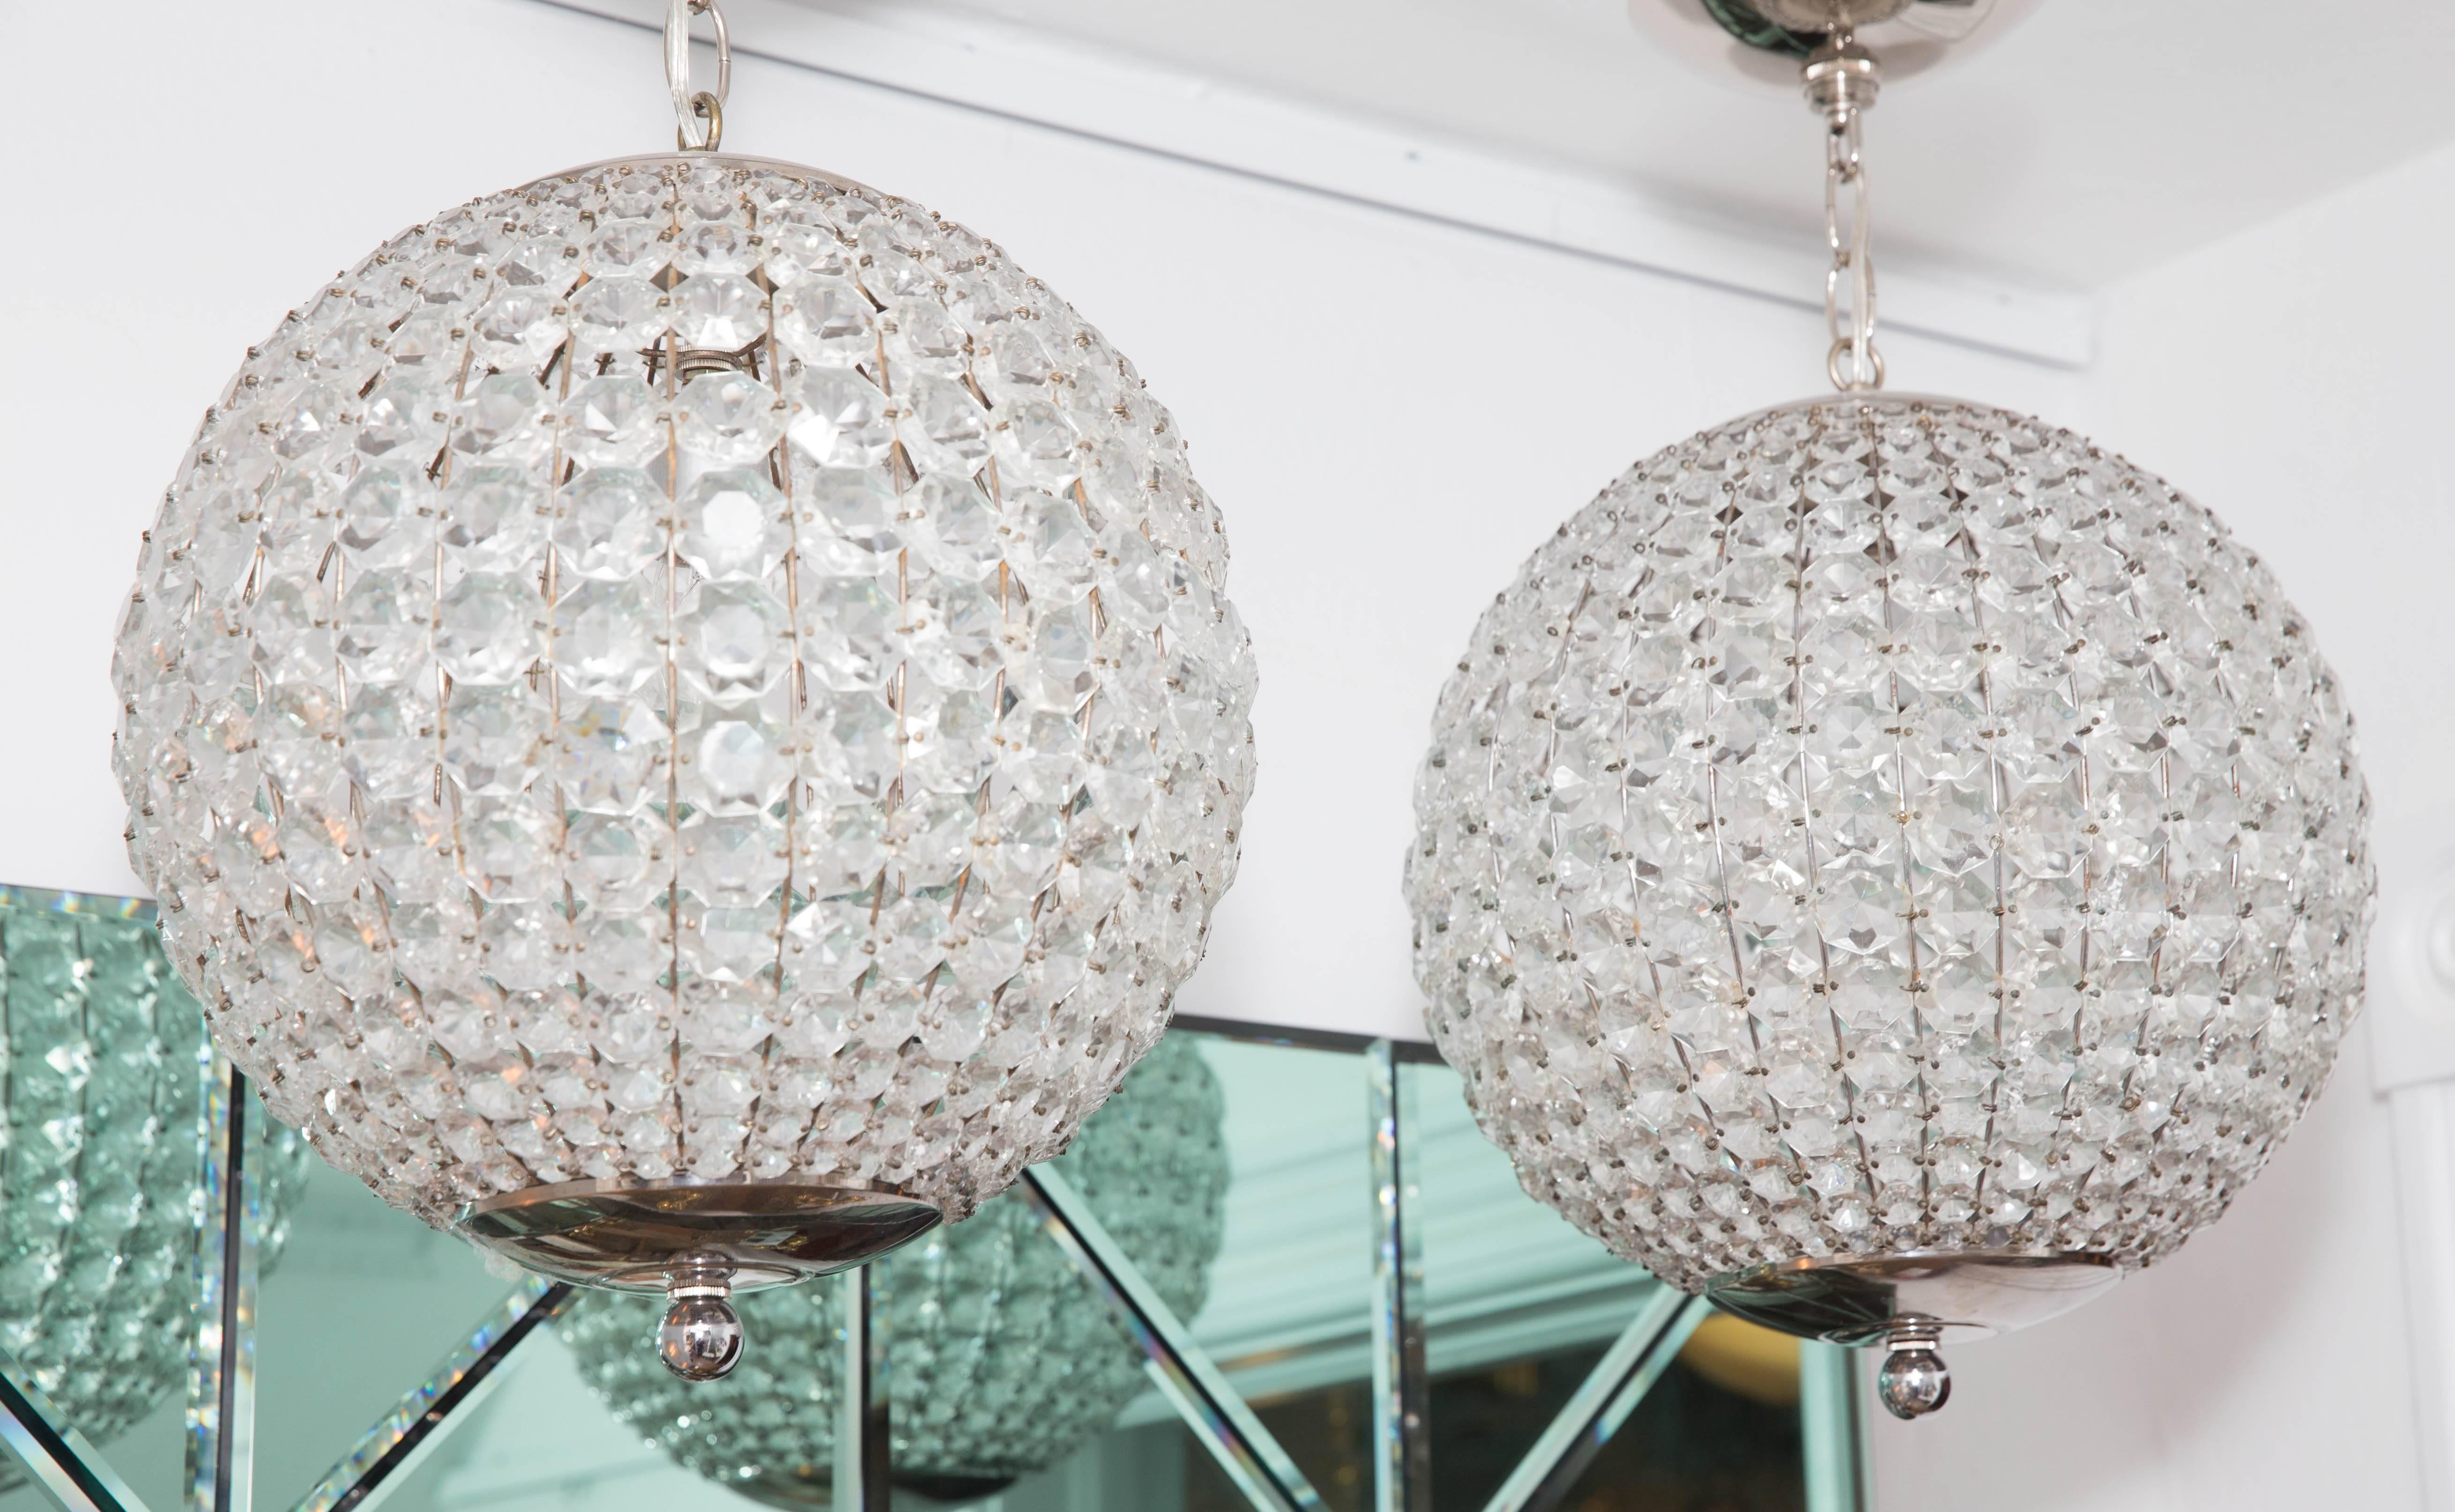 Spherical pendants composed of multiple faceted glass "Jewel" elements with chrome detail.